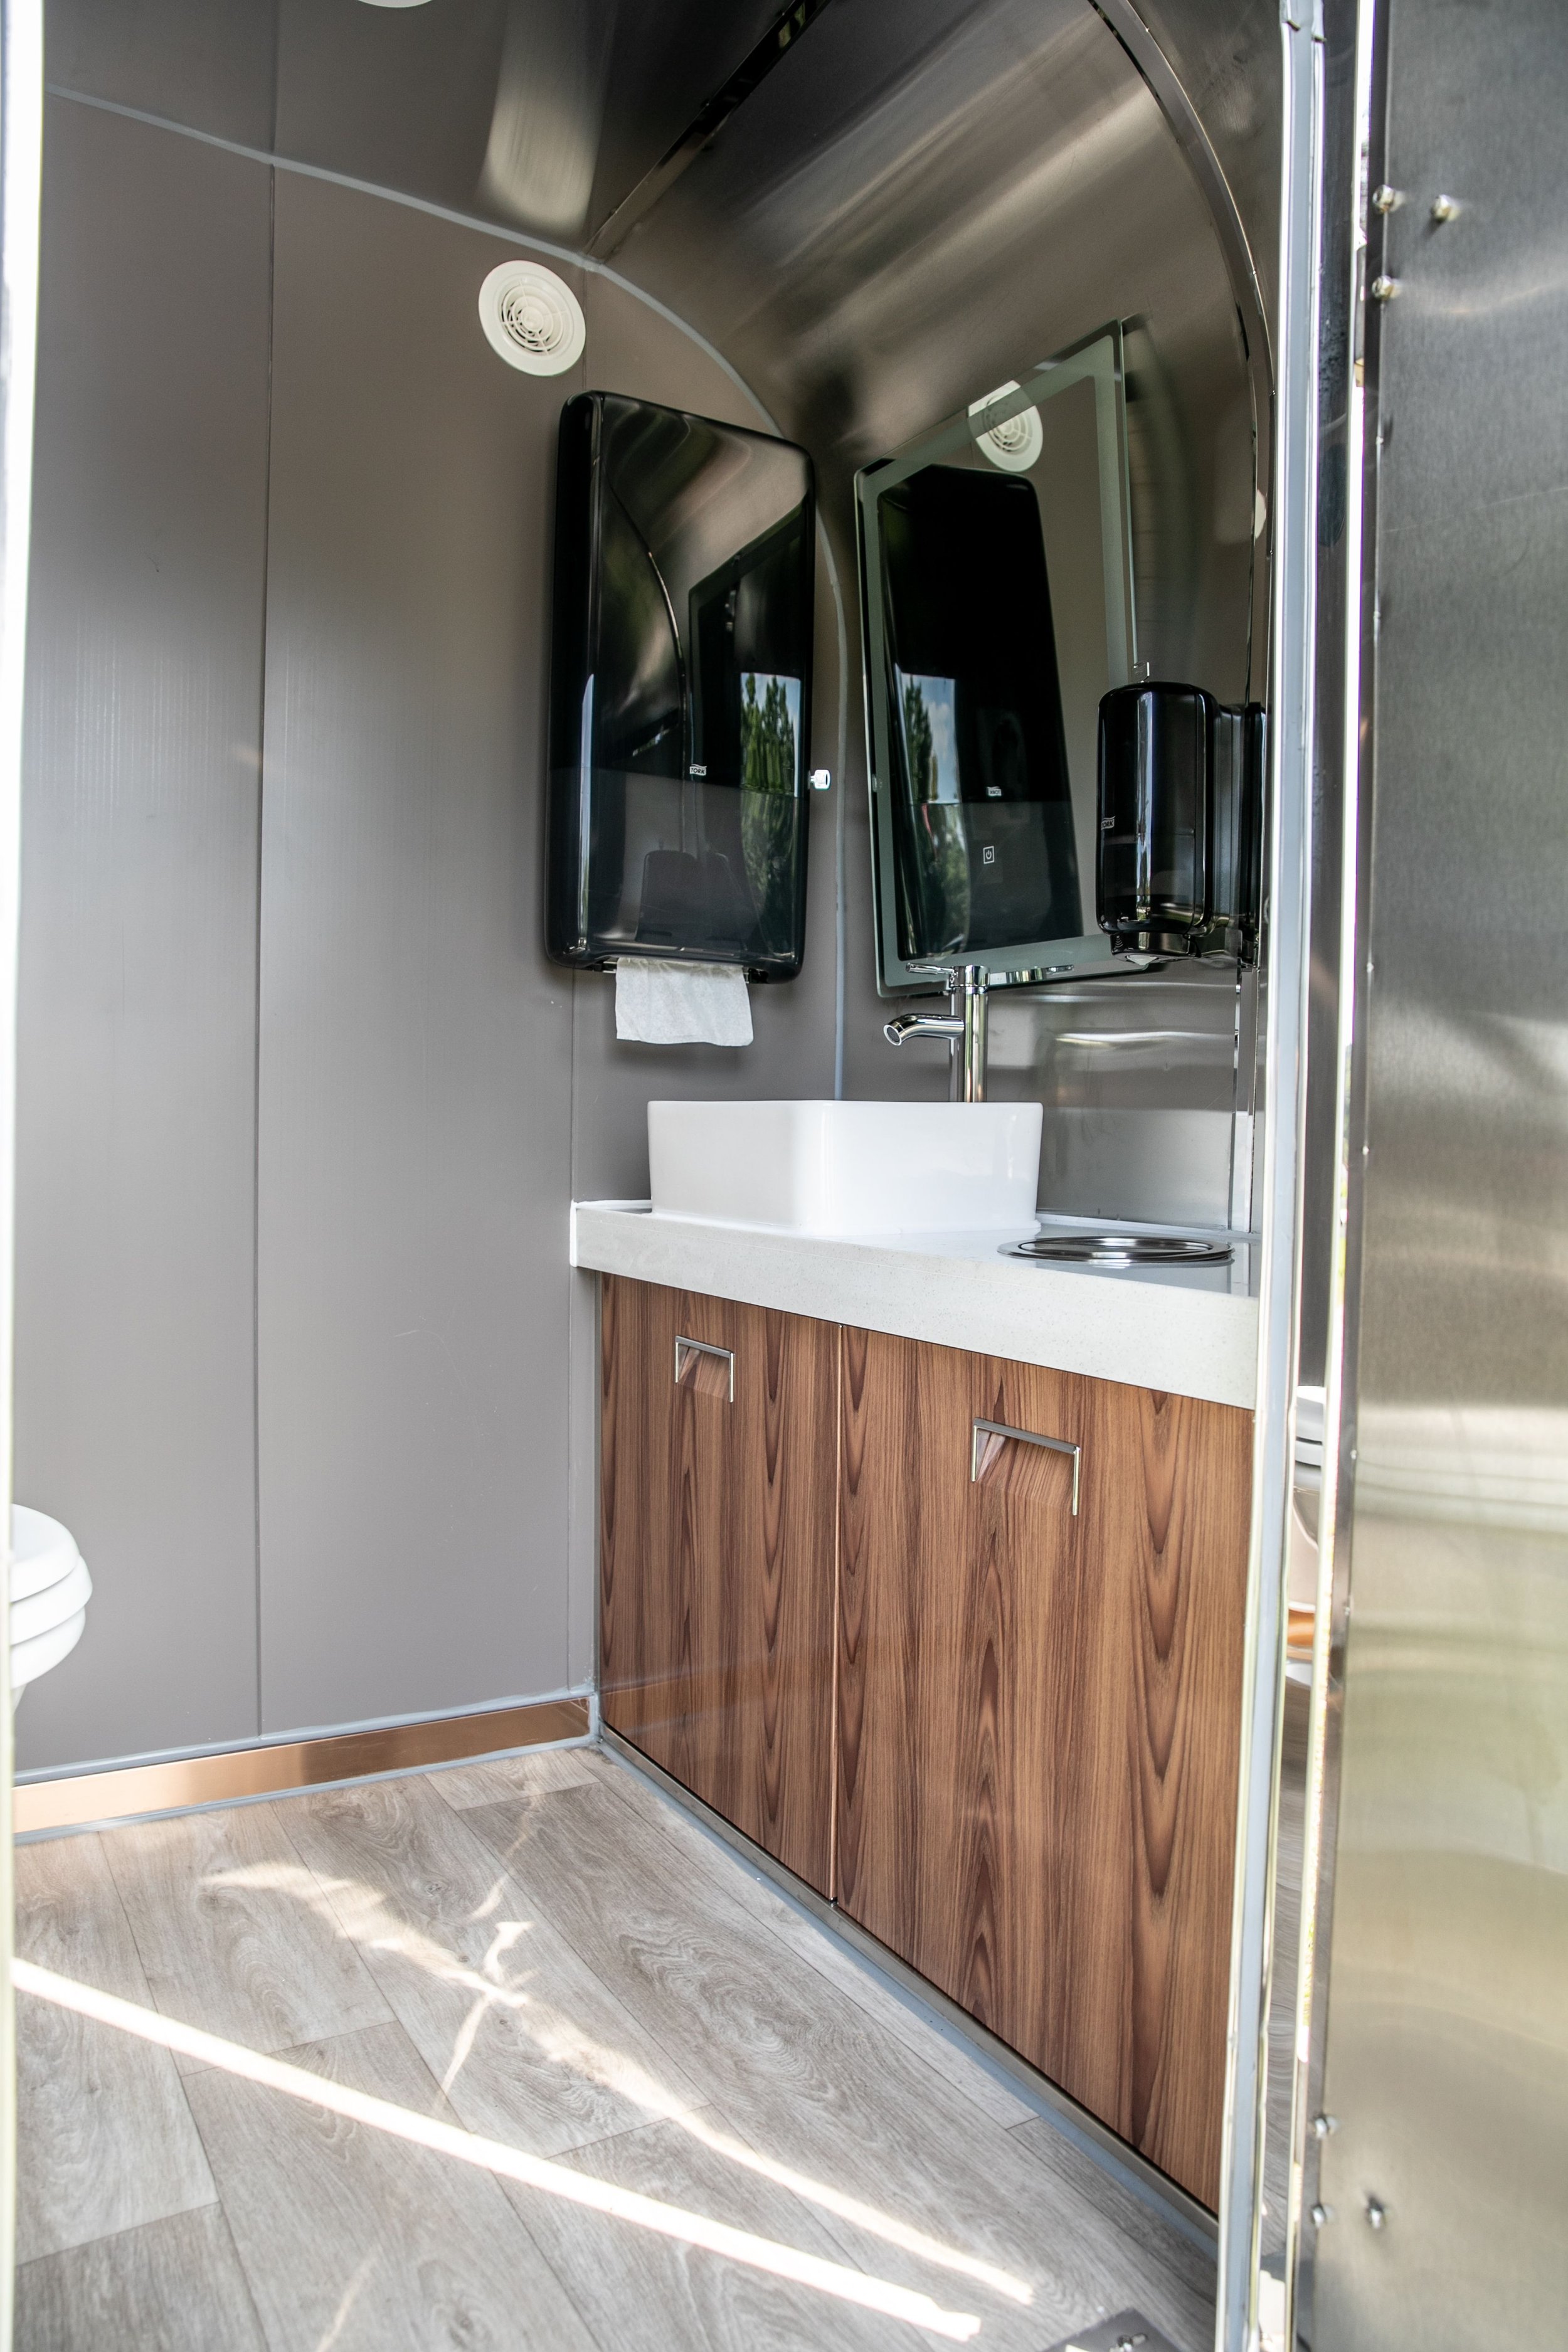 The Interior Shines Like the Outside of the Portable Vintage Series Restroom Trailer in Alabama.jpeg